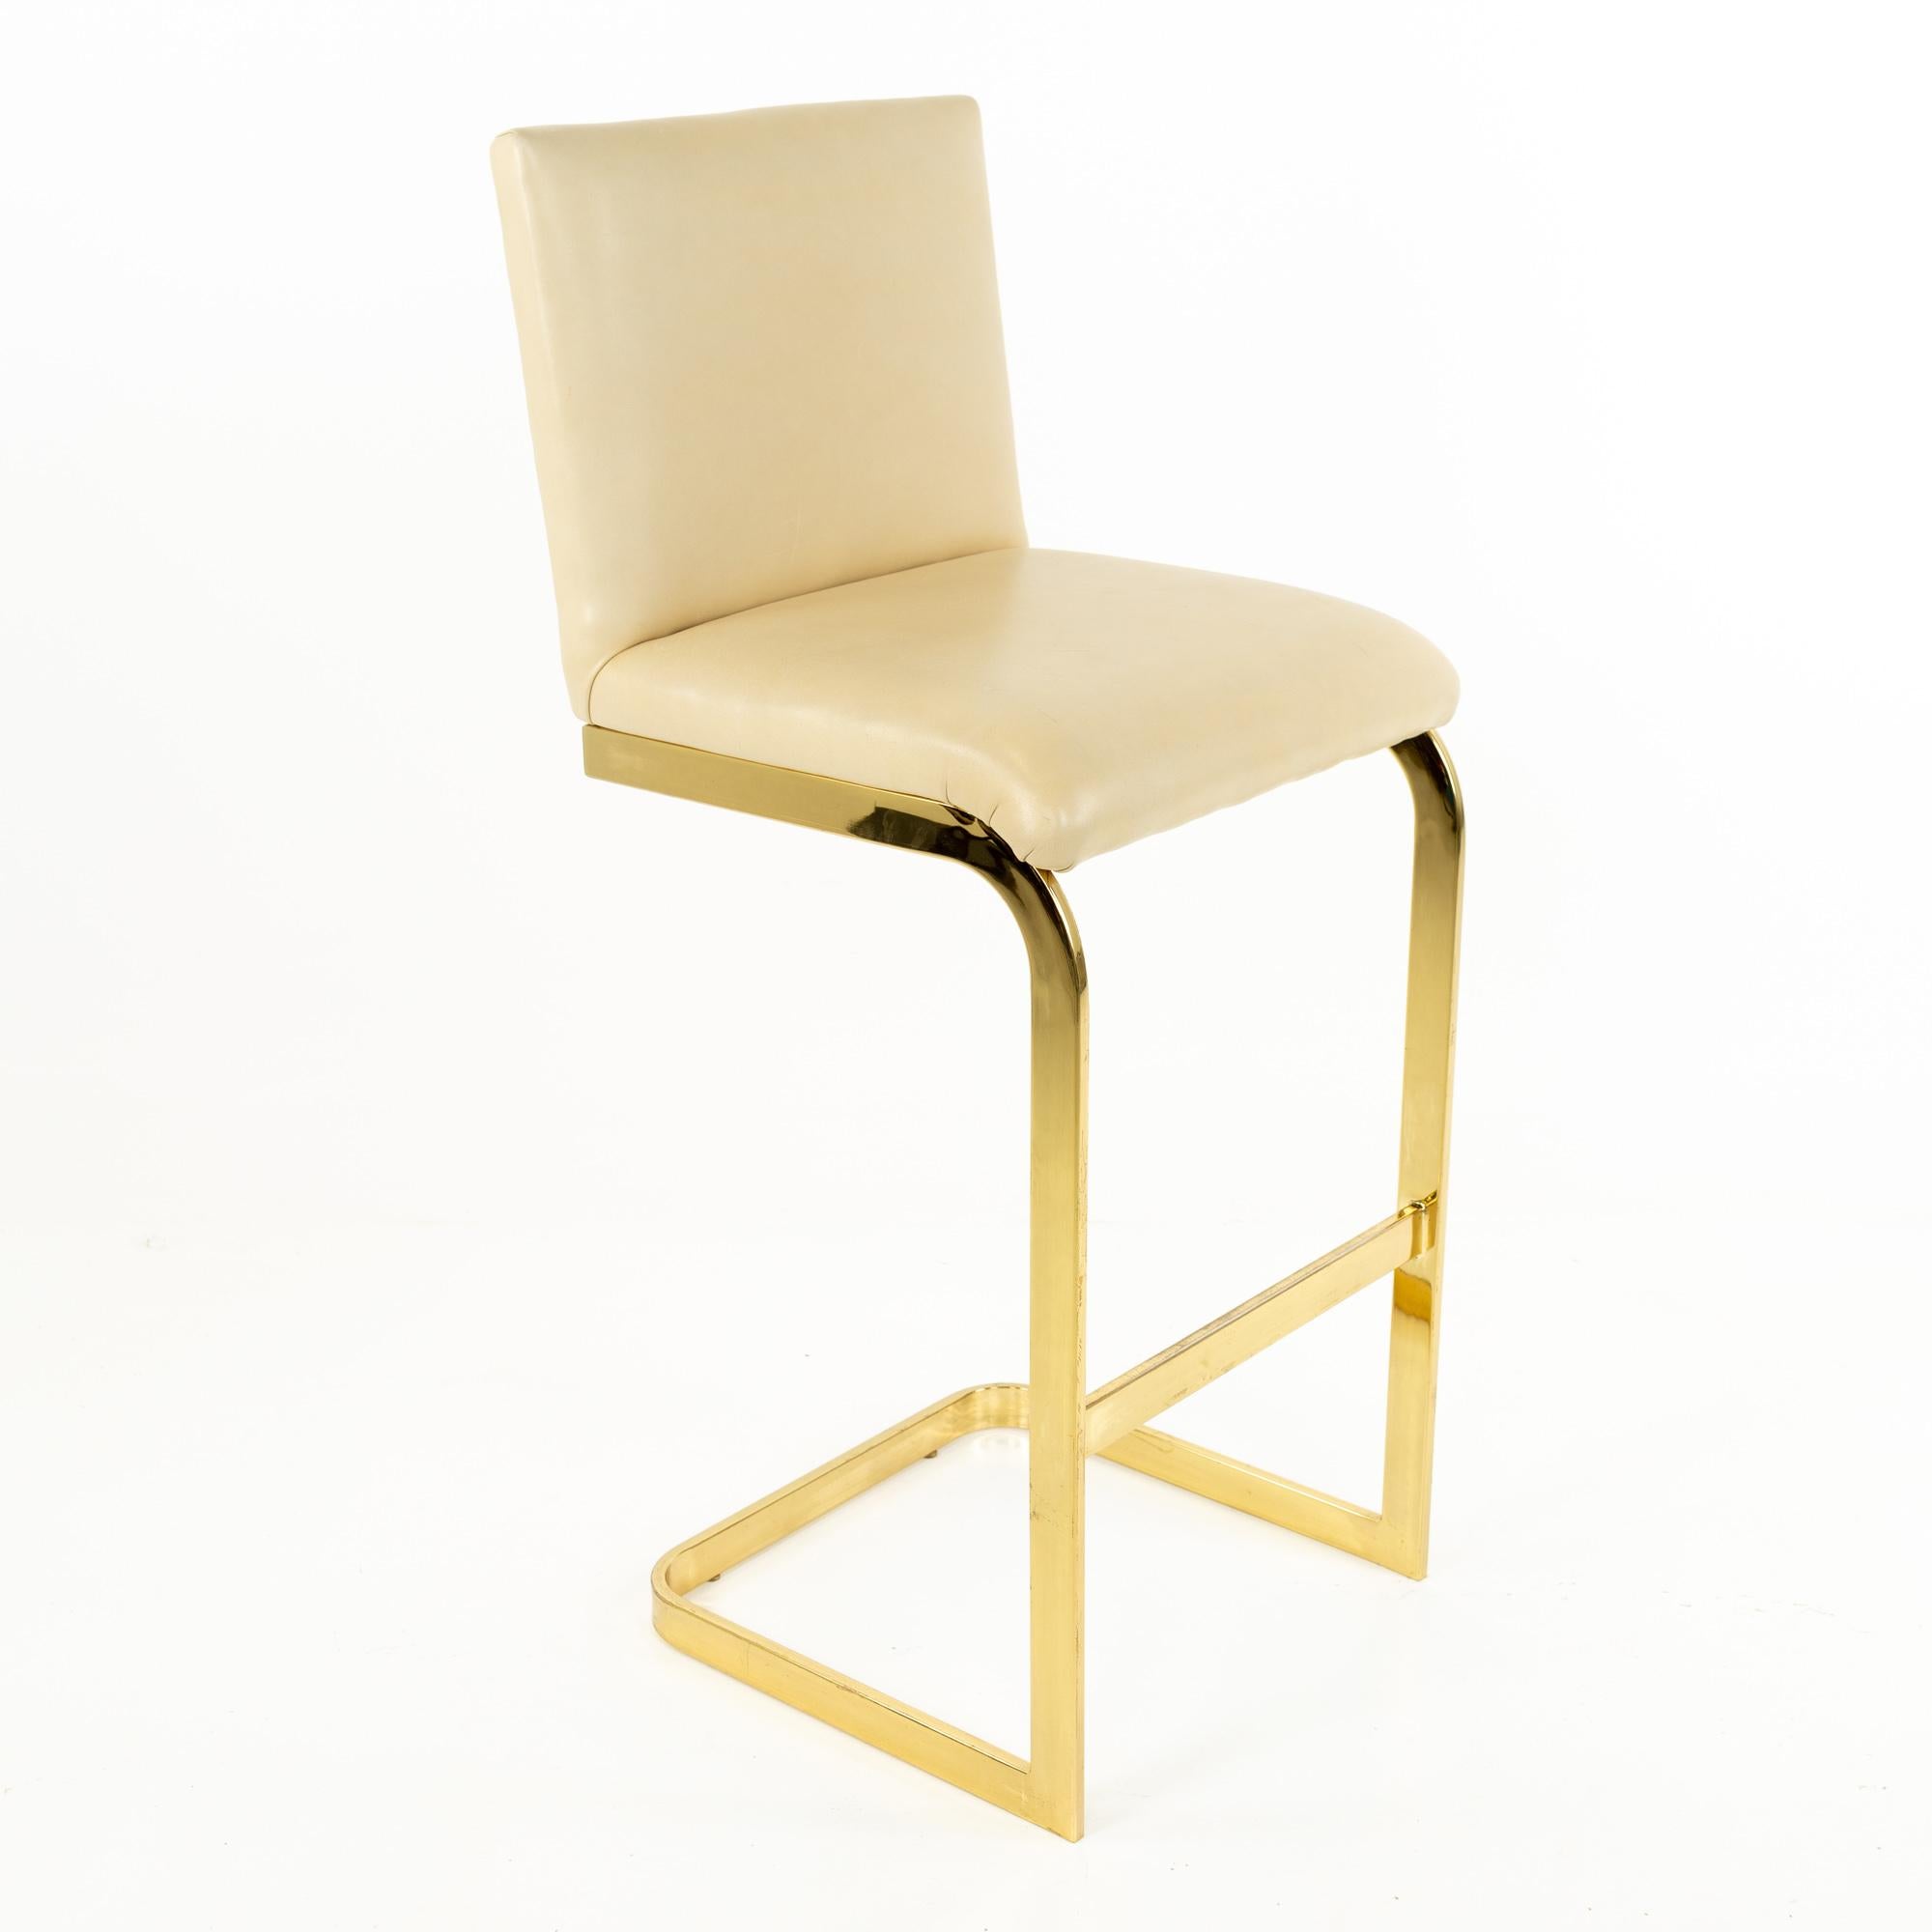 Mid-Century Modern Milo Baughman Style Mid Century Brass and Cream Upholstered Cantilever Bar Stool